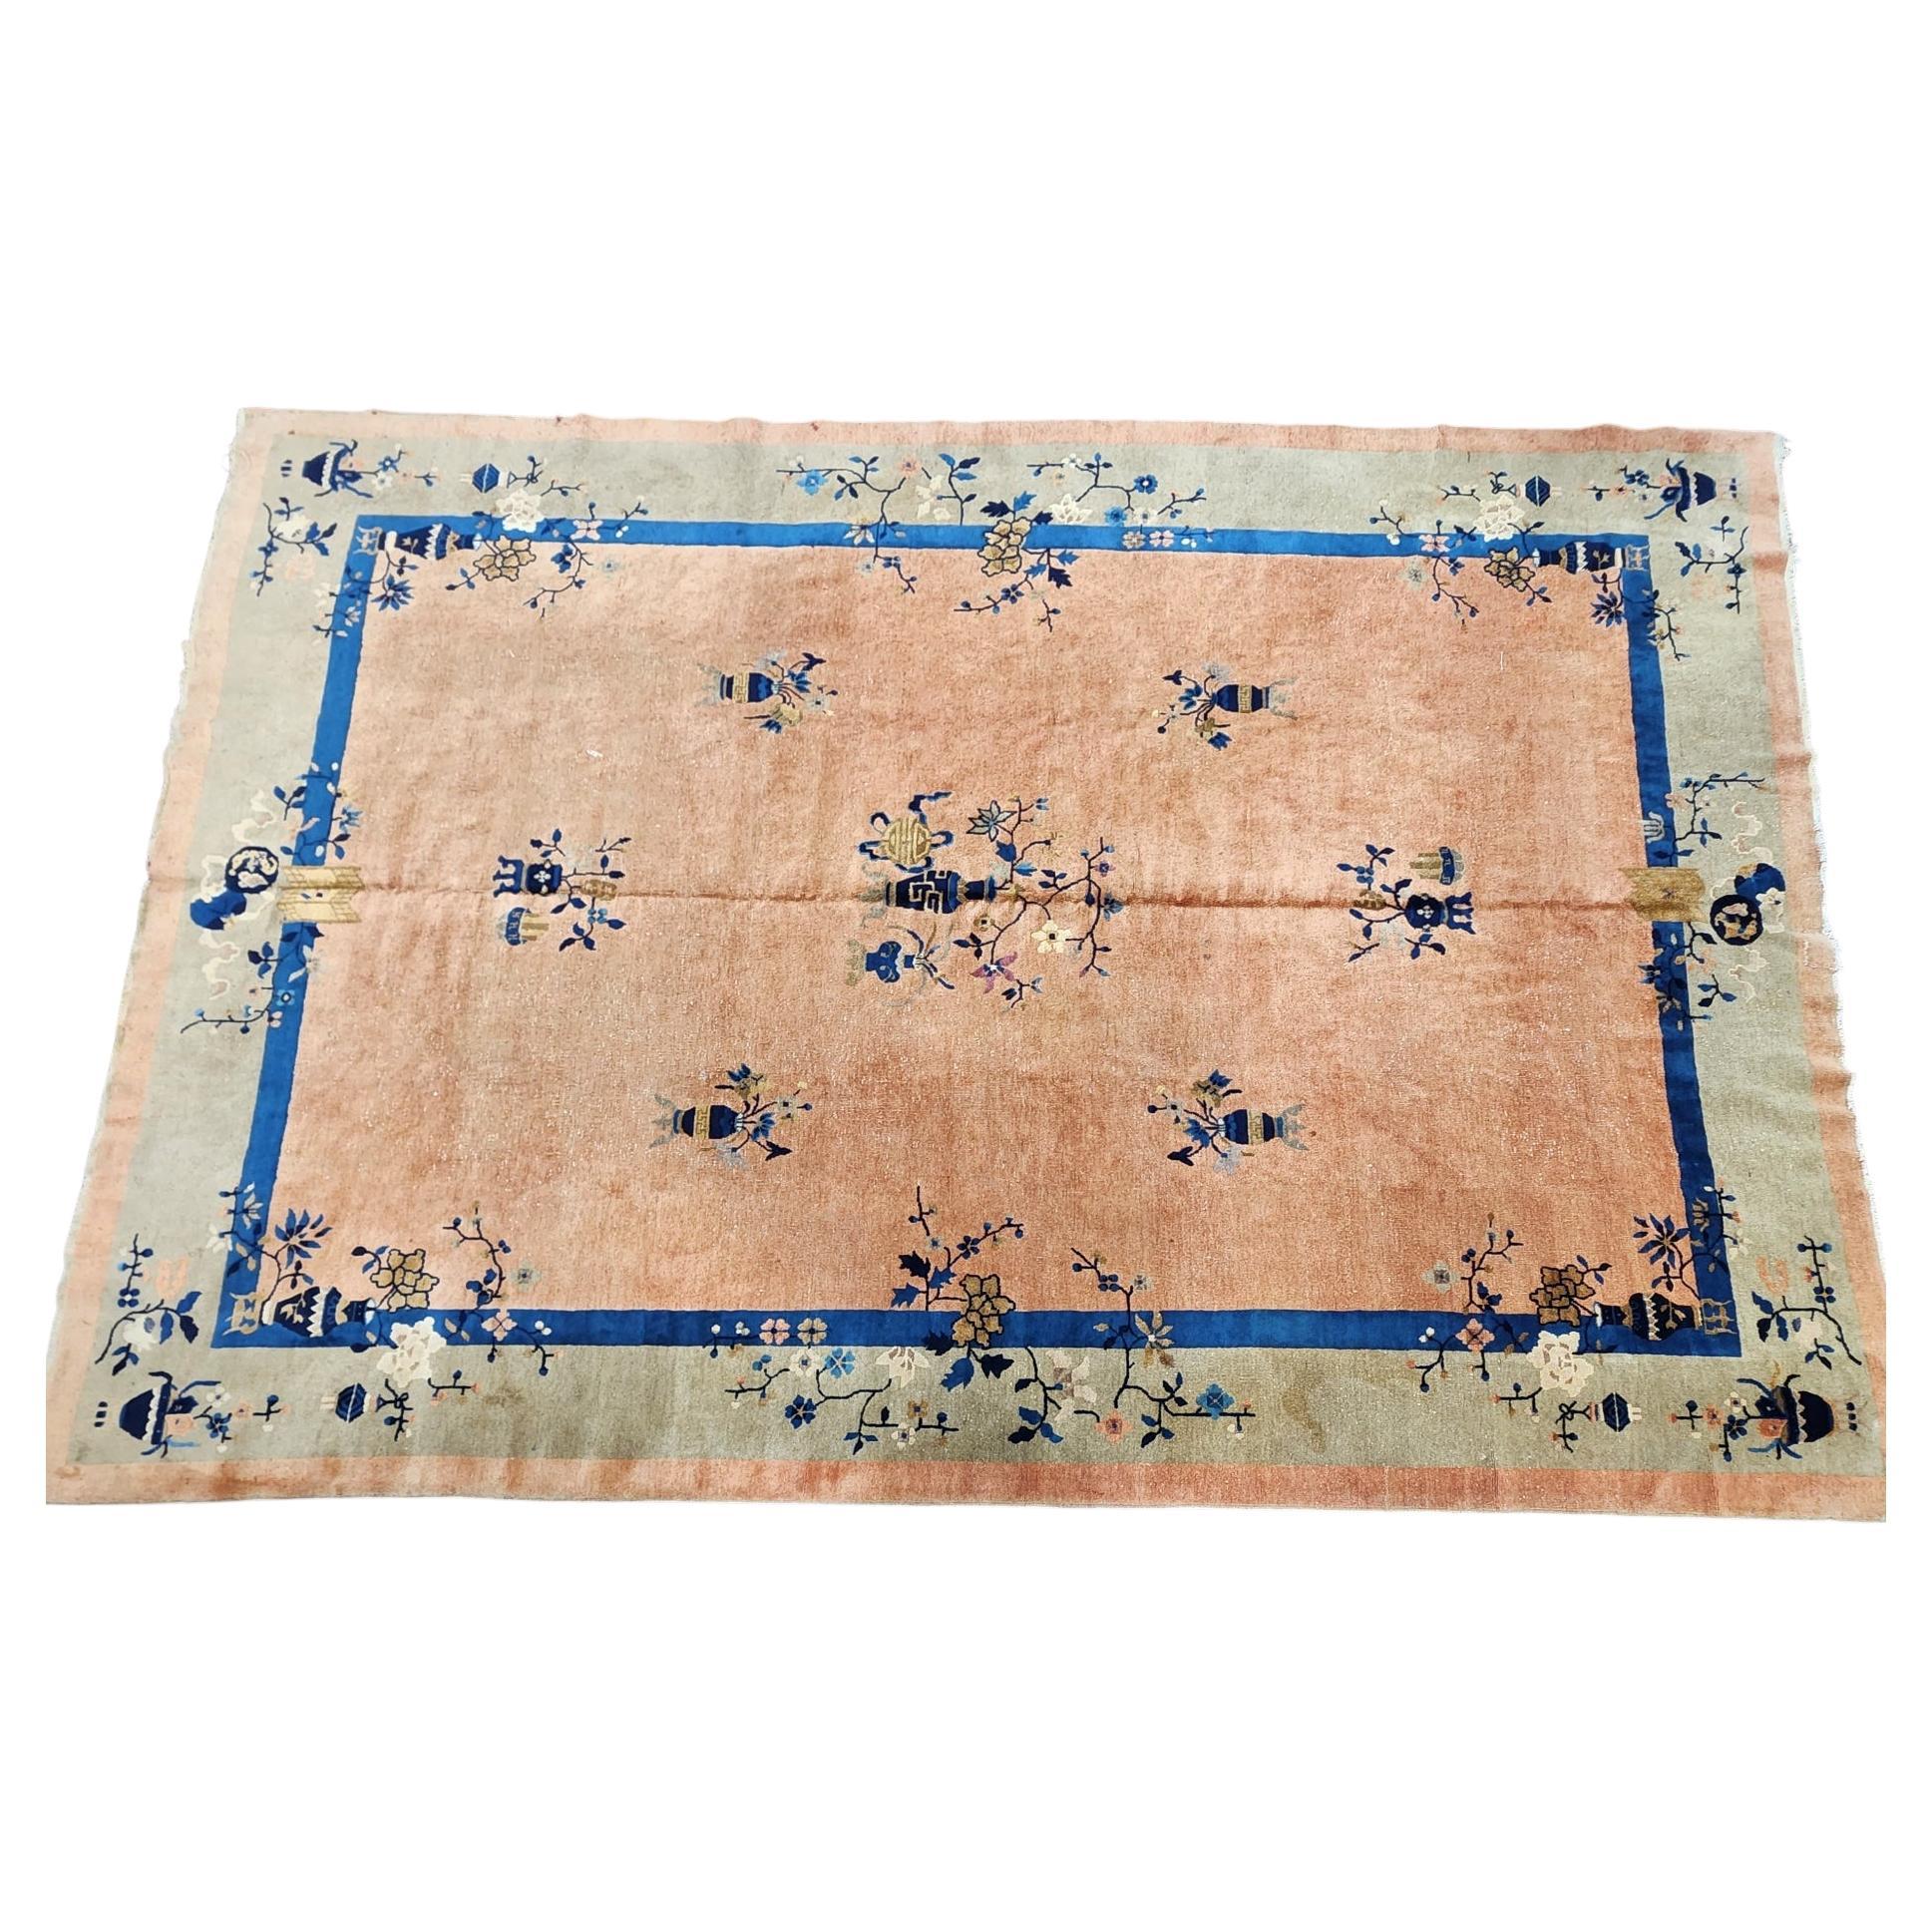 Early 20th Century Chinese Peking Art Deco Rug circa 1920 9x12 For Sale